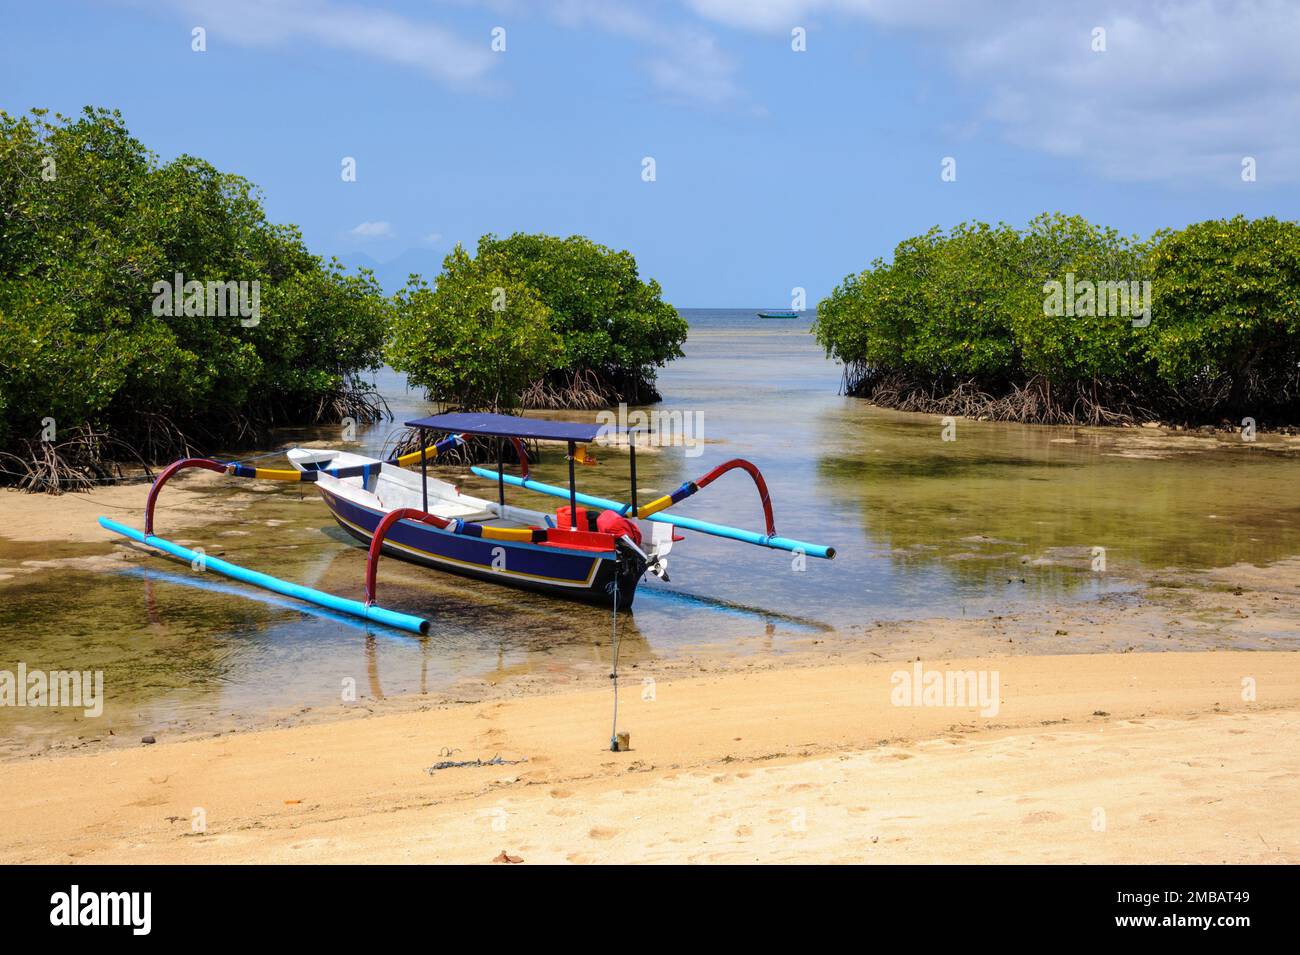 Boat near coral reef and mangroves on Nusa Lembongan, Indonesia Stock Photo